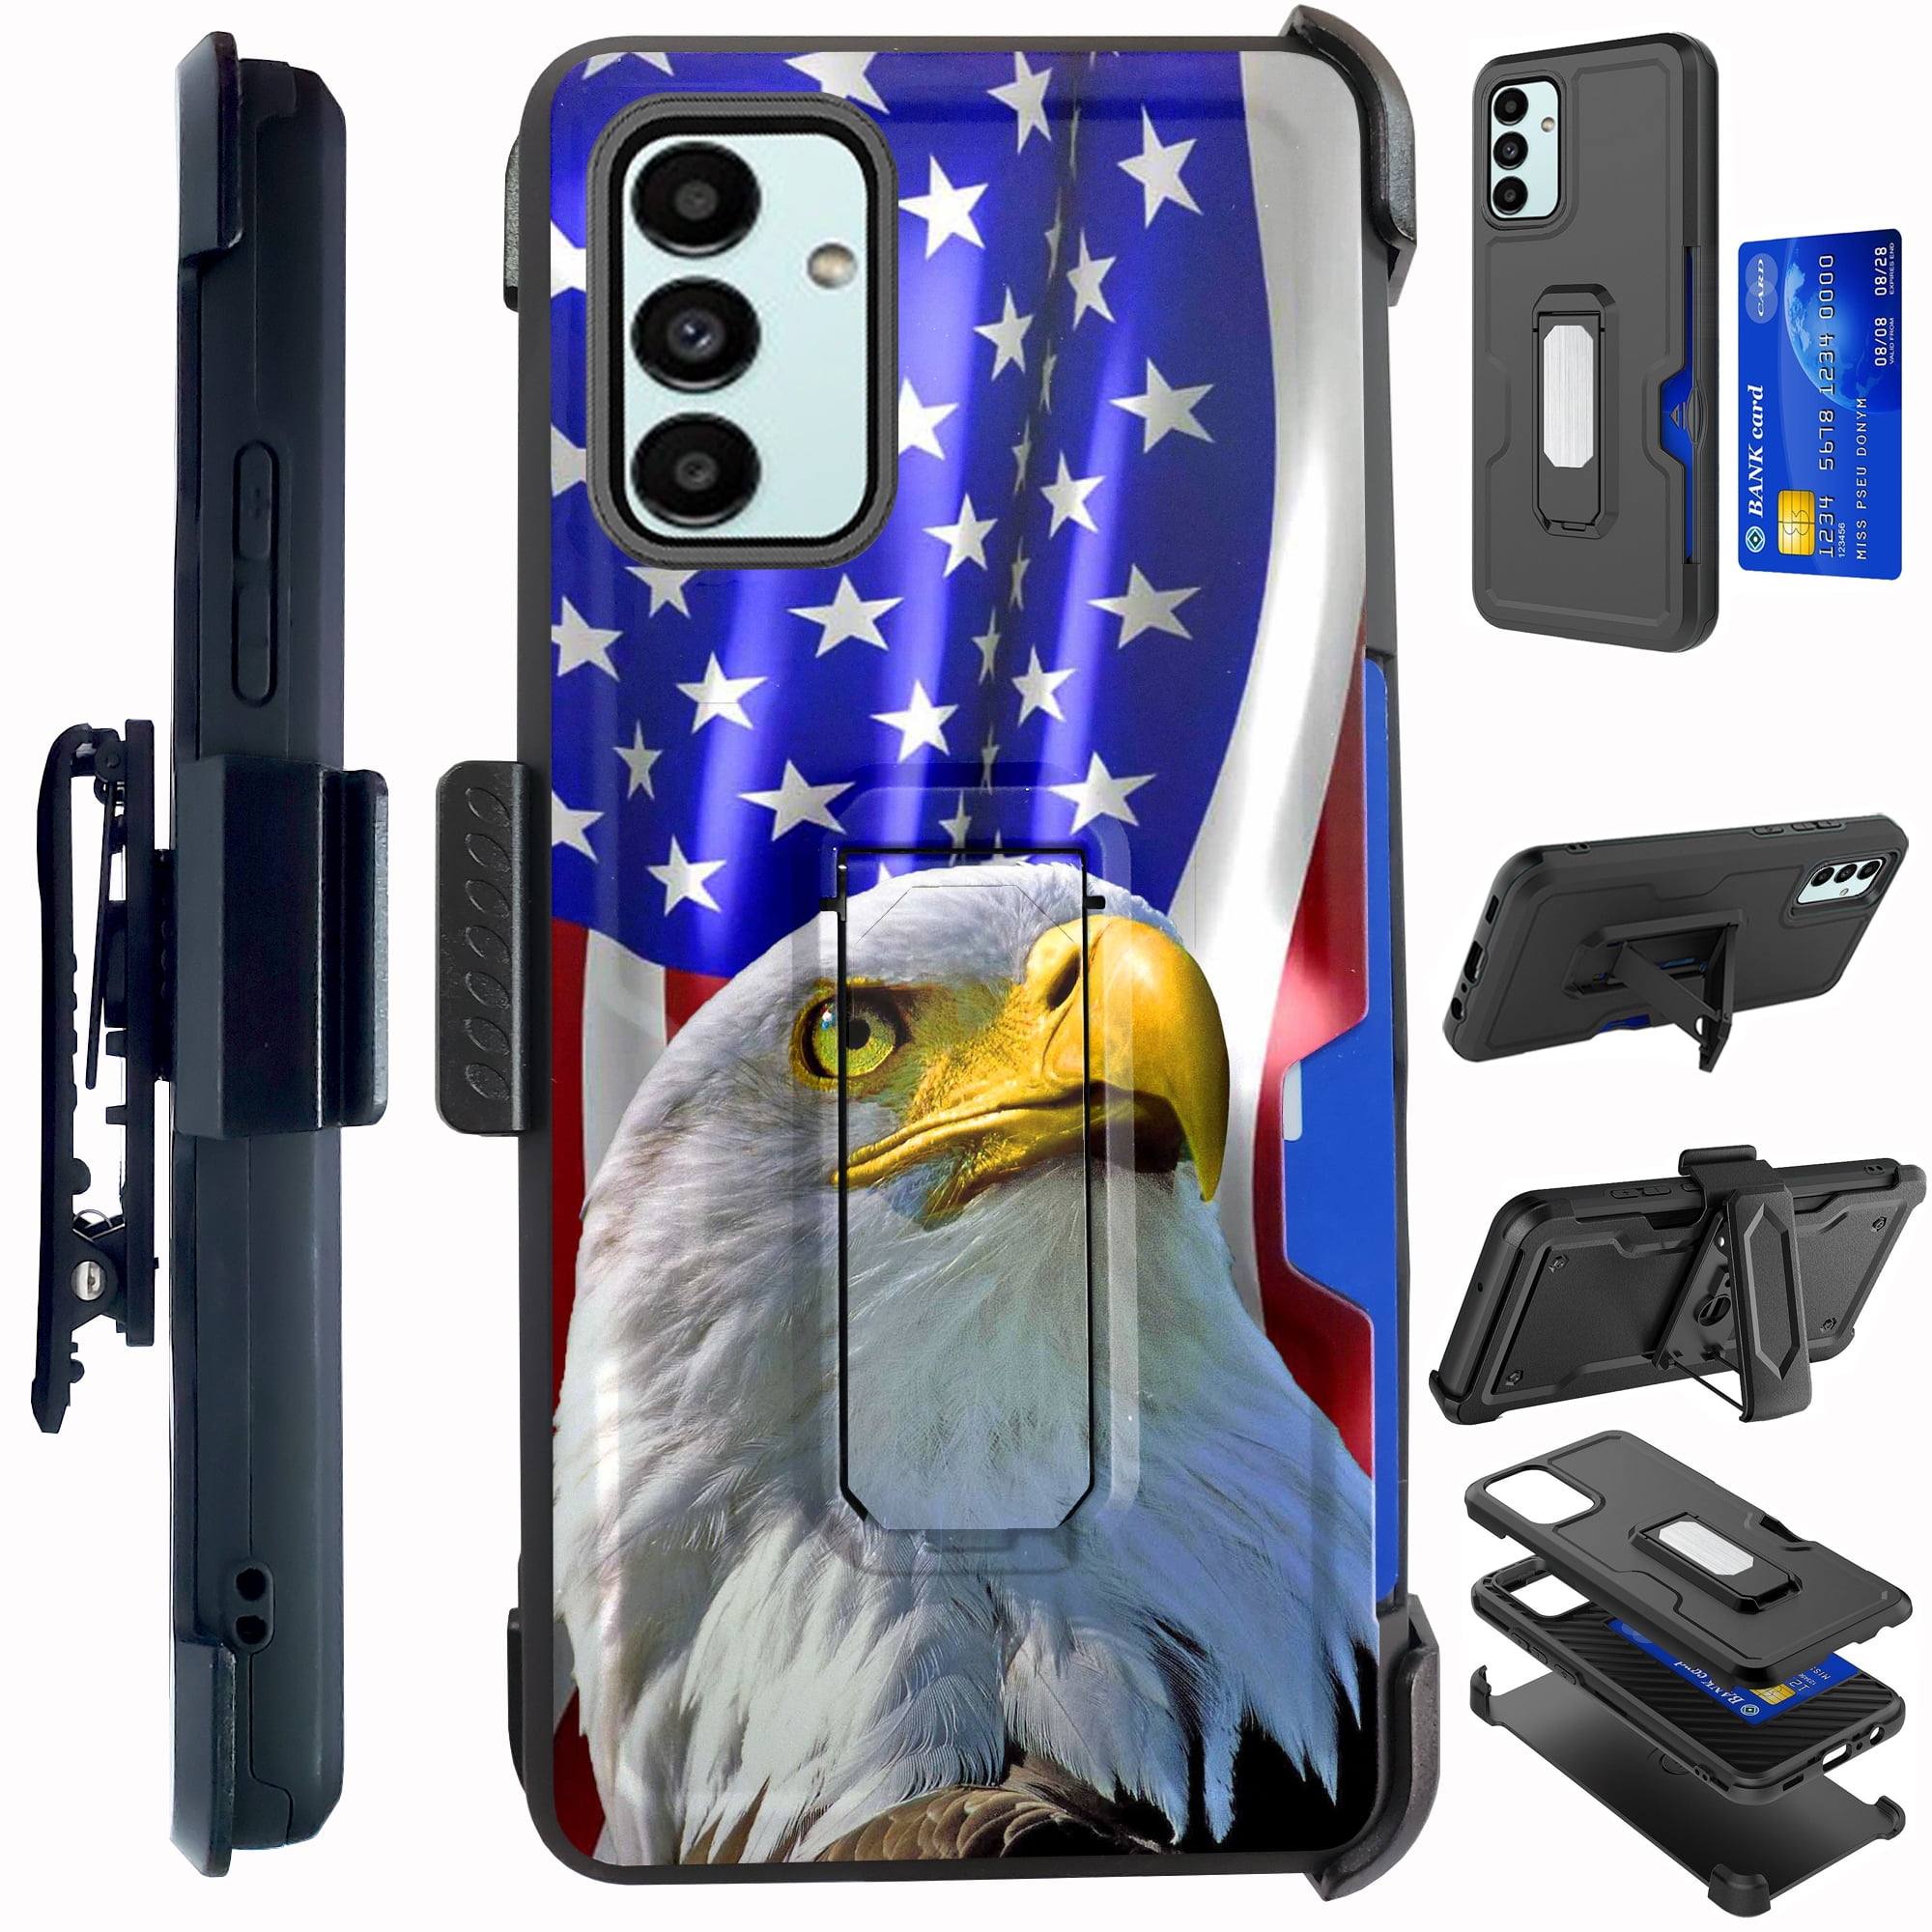 Black Retail Packaging Eagle Cell Apple iPhone 6 Plus Skin Hybrid Case with Stand and Holster 